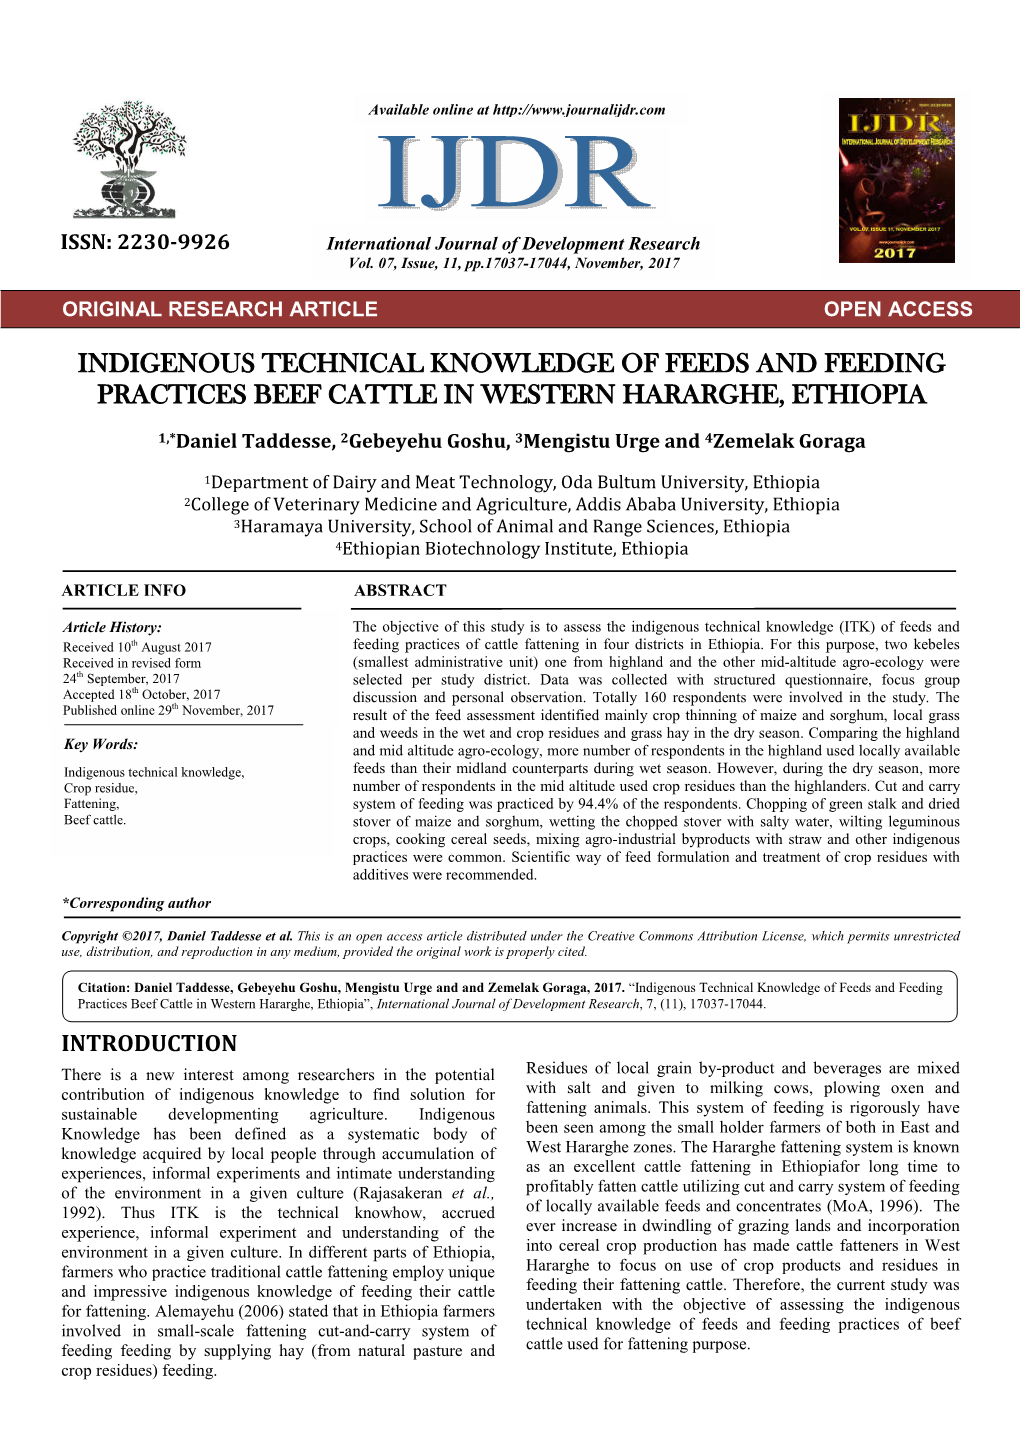 Indigenous Technical Knowledge of Feeds and Feeding Practices Beef Cattle in Western Hararghe, Ethiopia